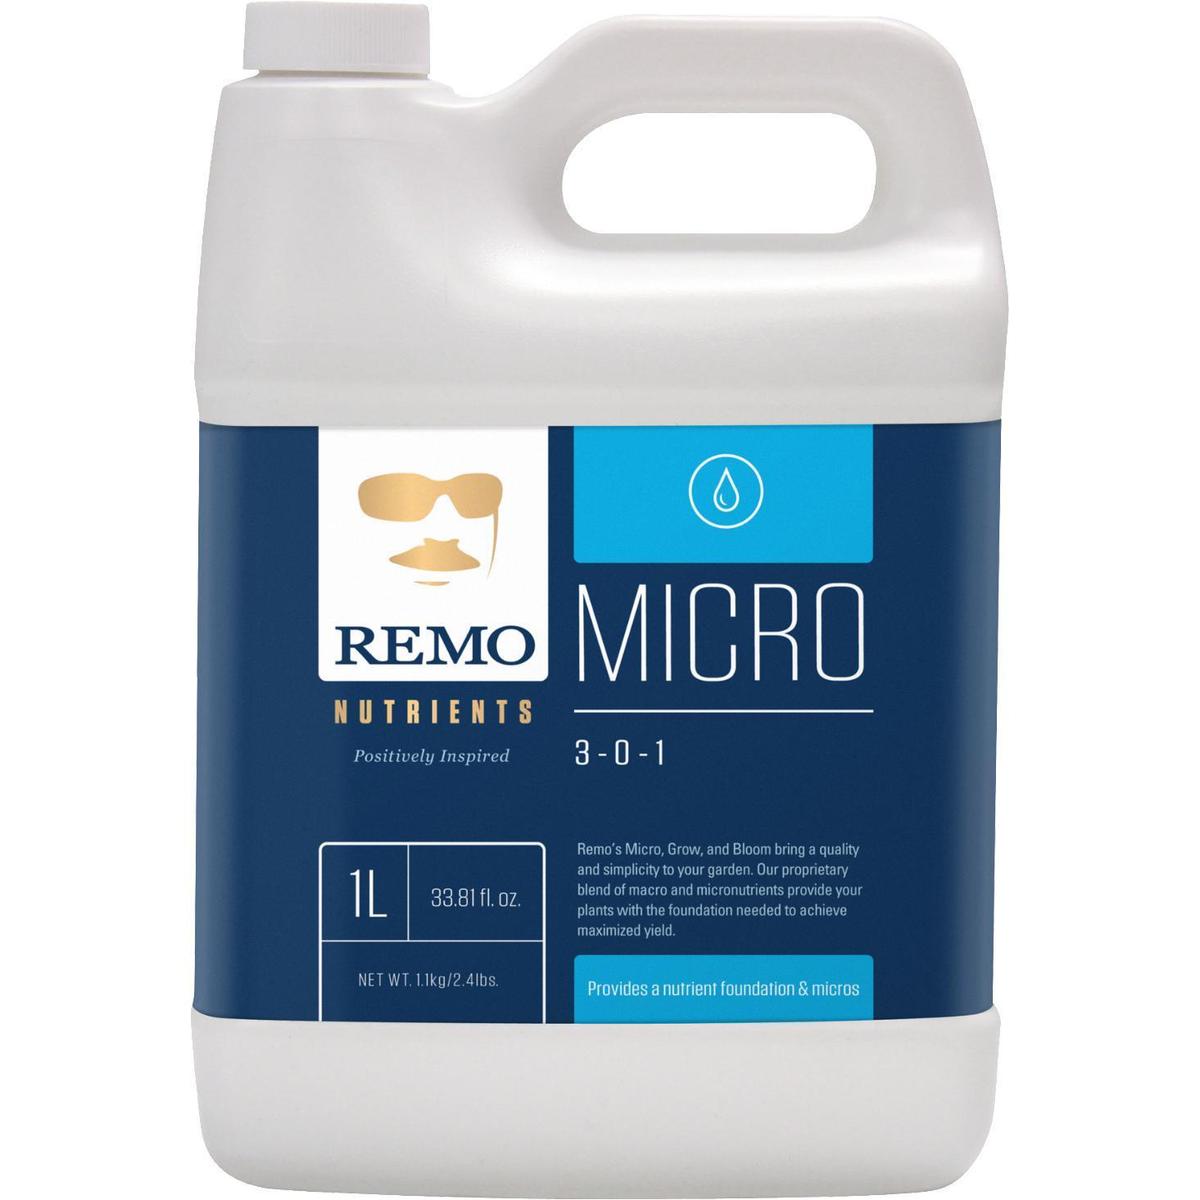 Product Image:Remo Nutrients Micro (3-0-1)